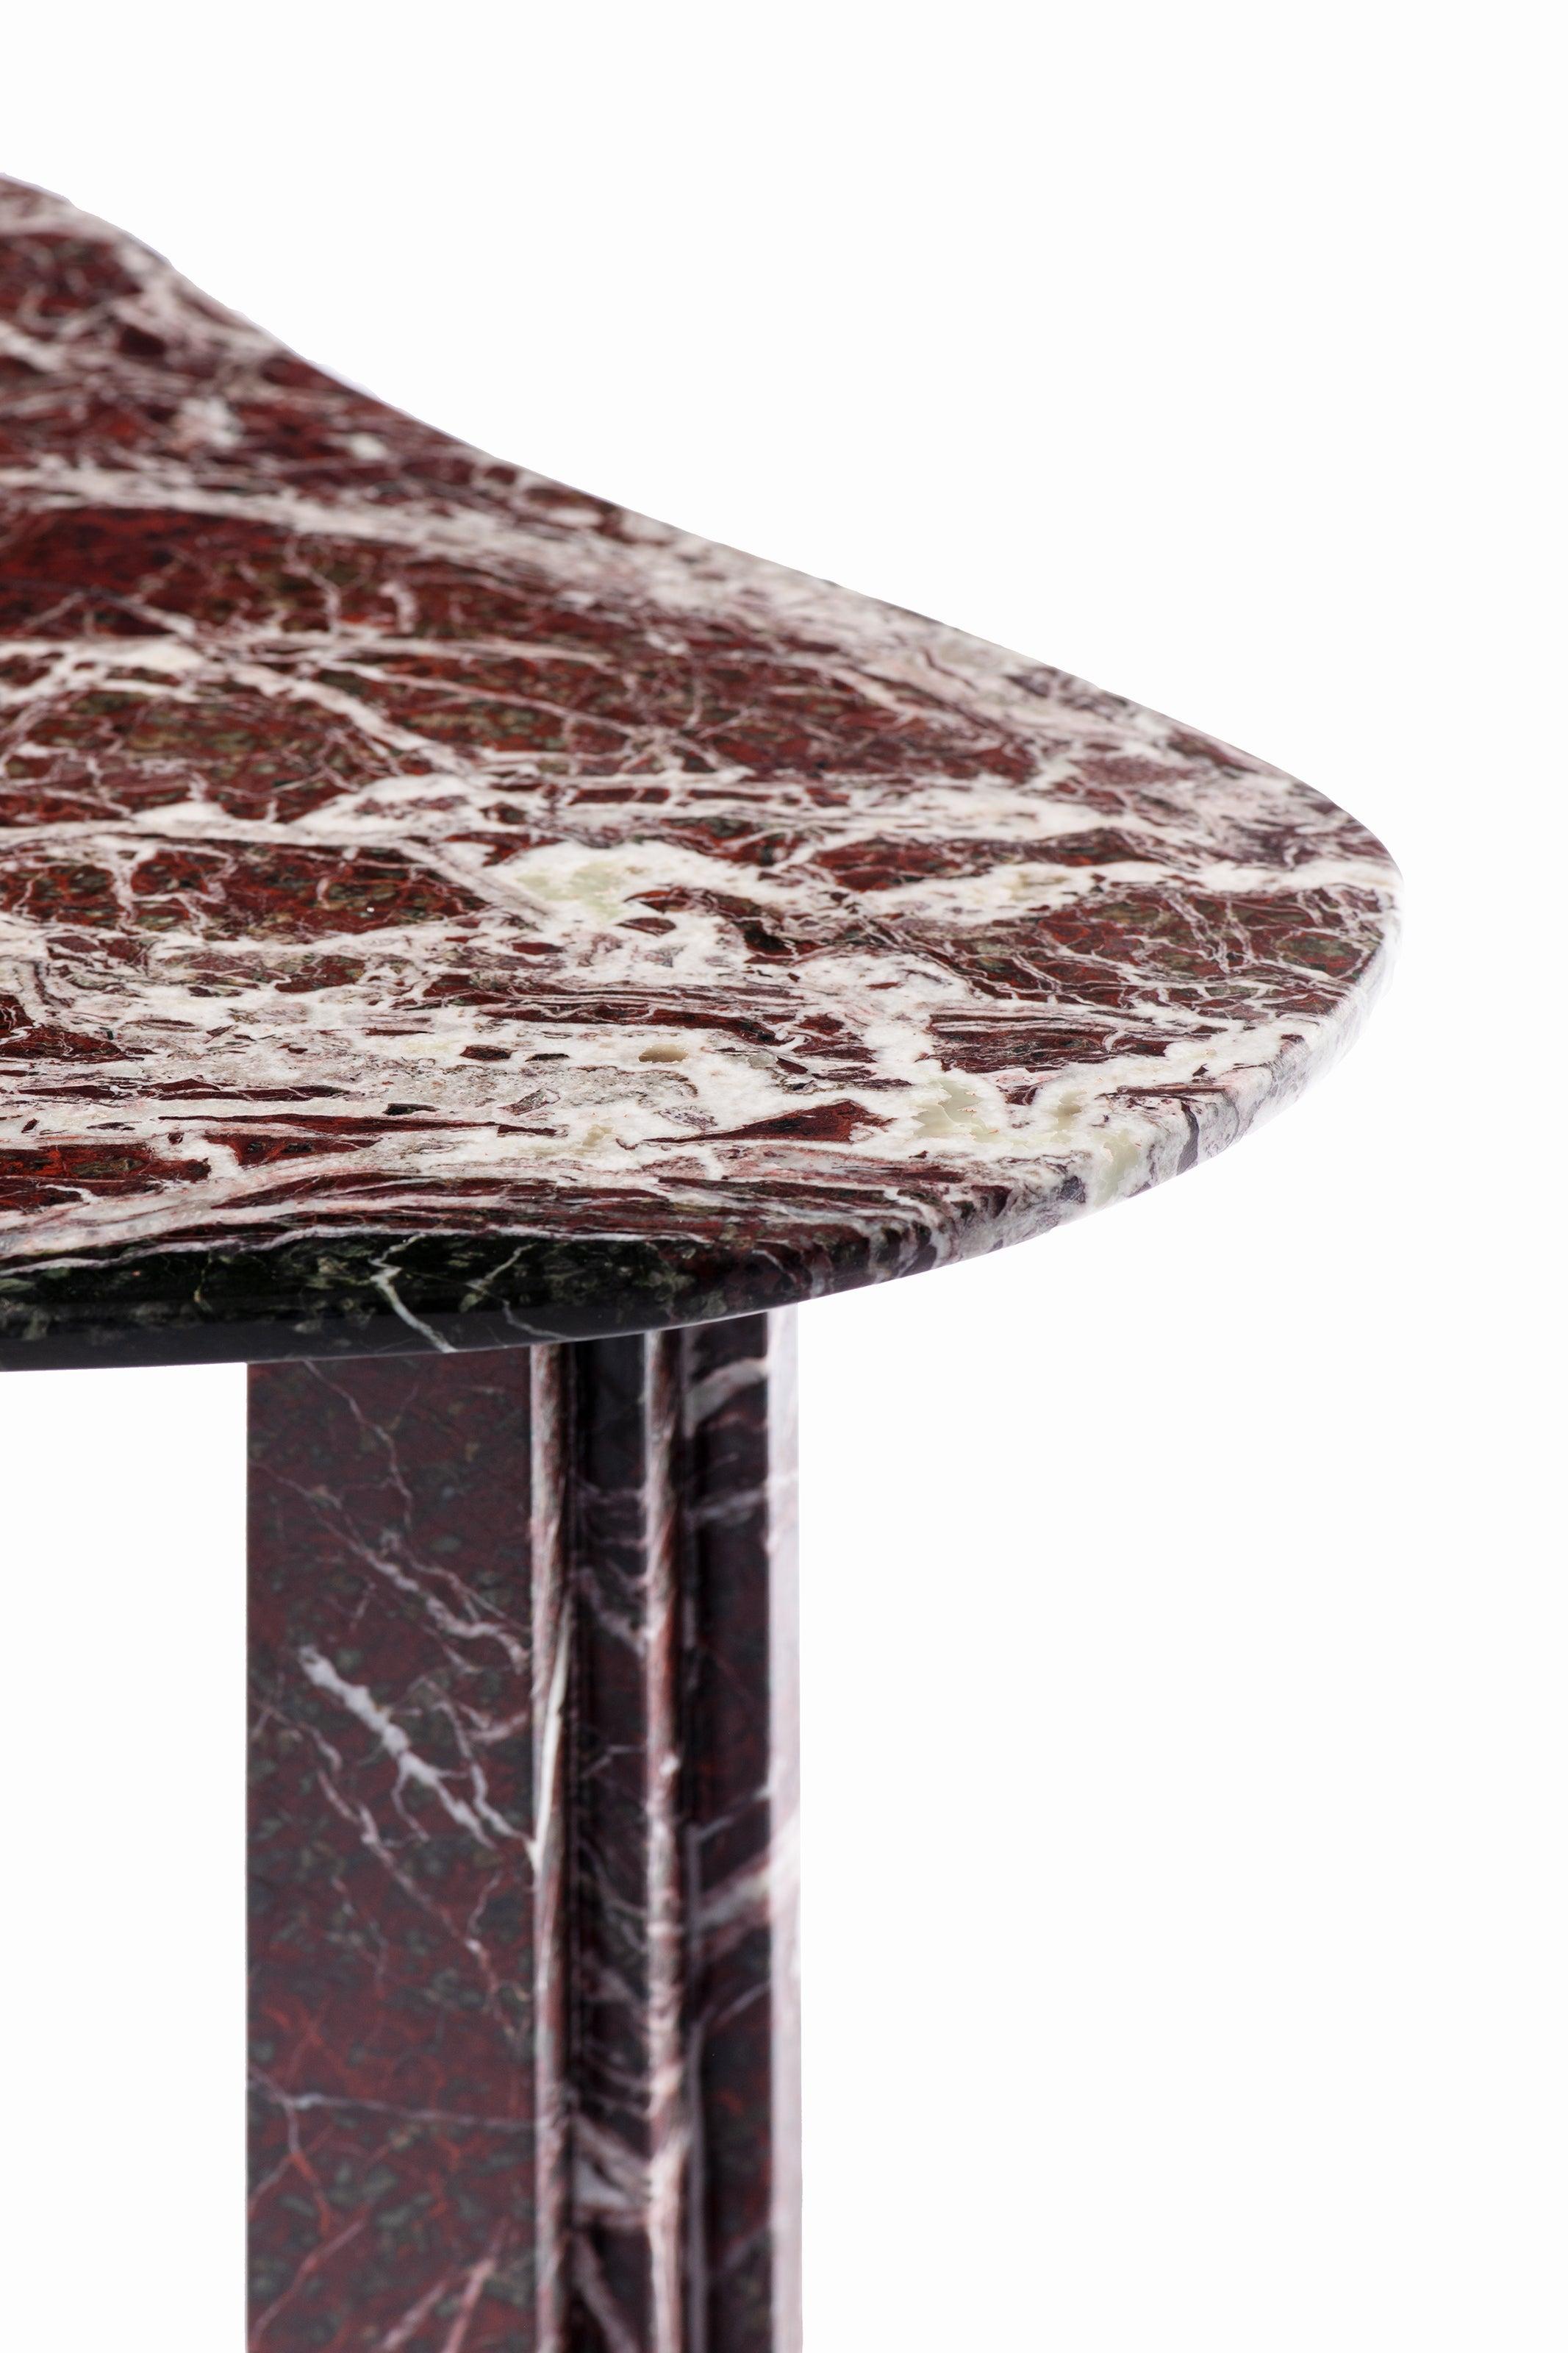 Organic Modern She Said Sculptural Red Marble Coffee Table Signed by Lorenzo Bini